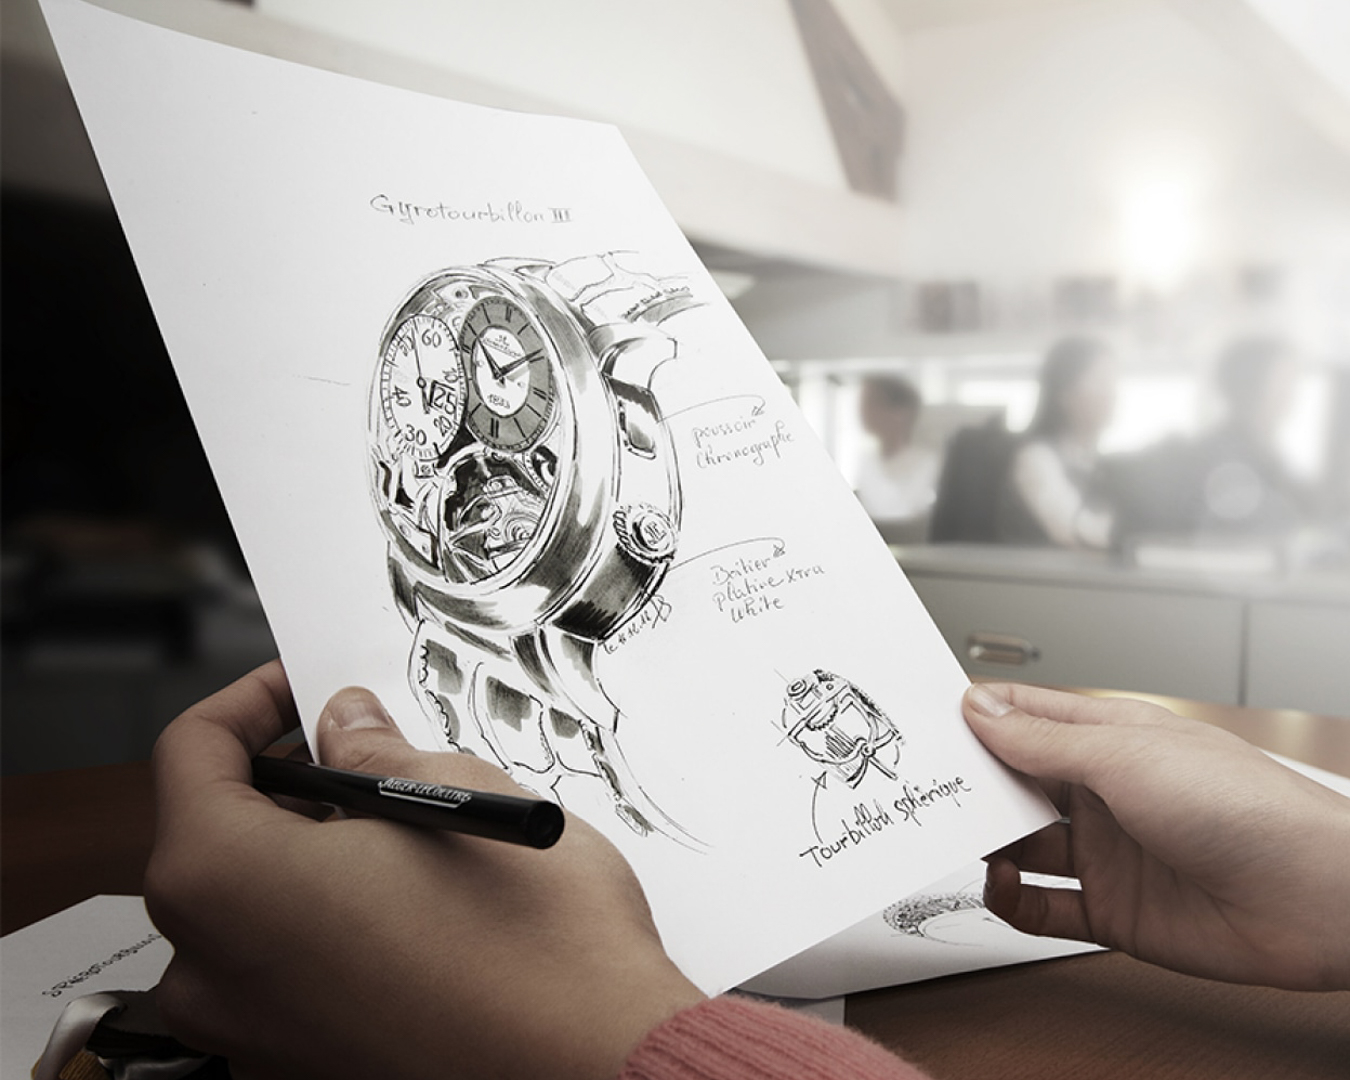 Research & Development: in the heart of Jaeger-LeCoultre’s creativity